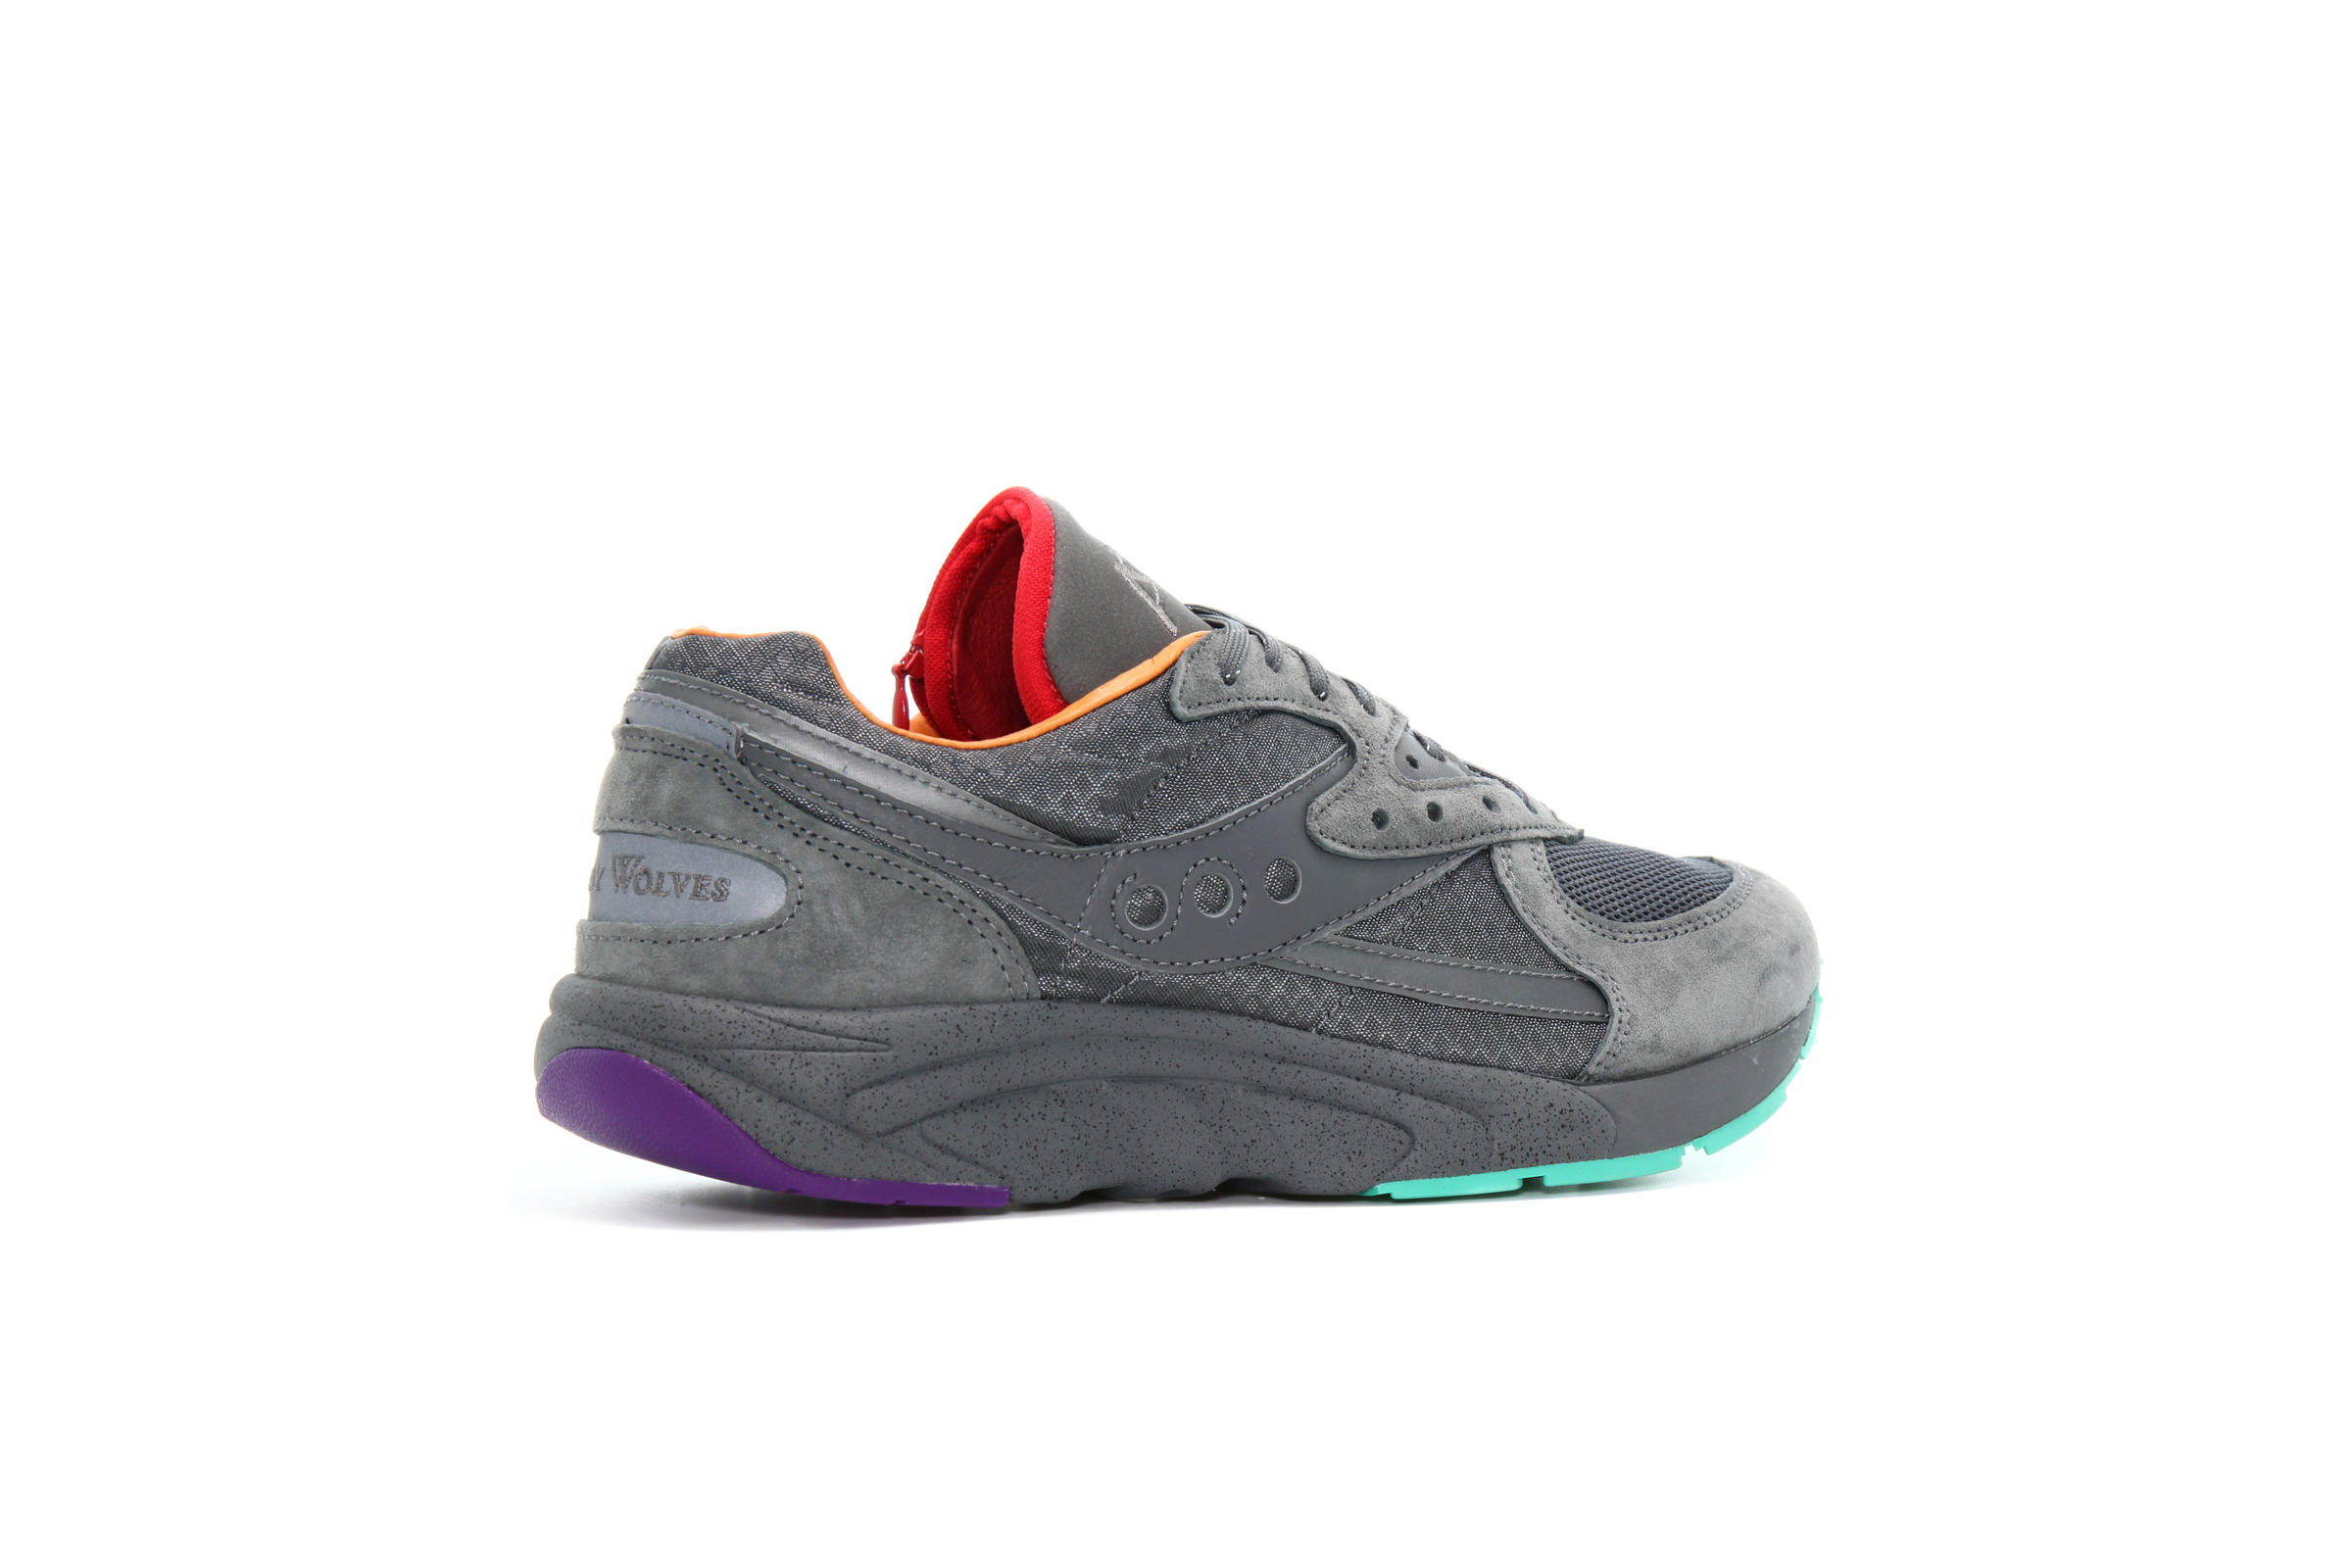 Saucony x Raised By Wolves AYA "GREY"